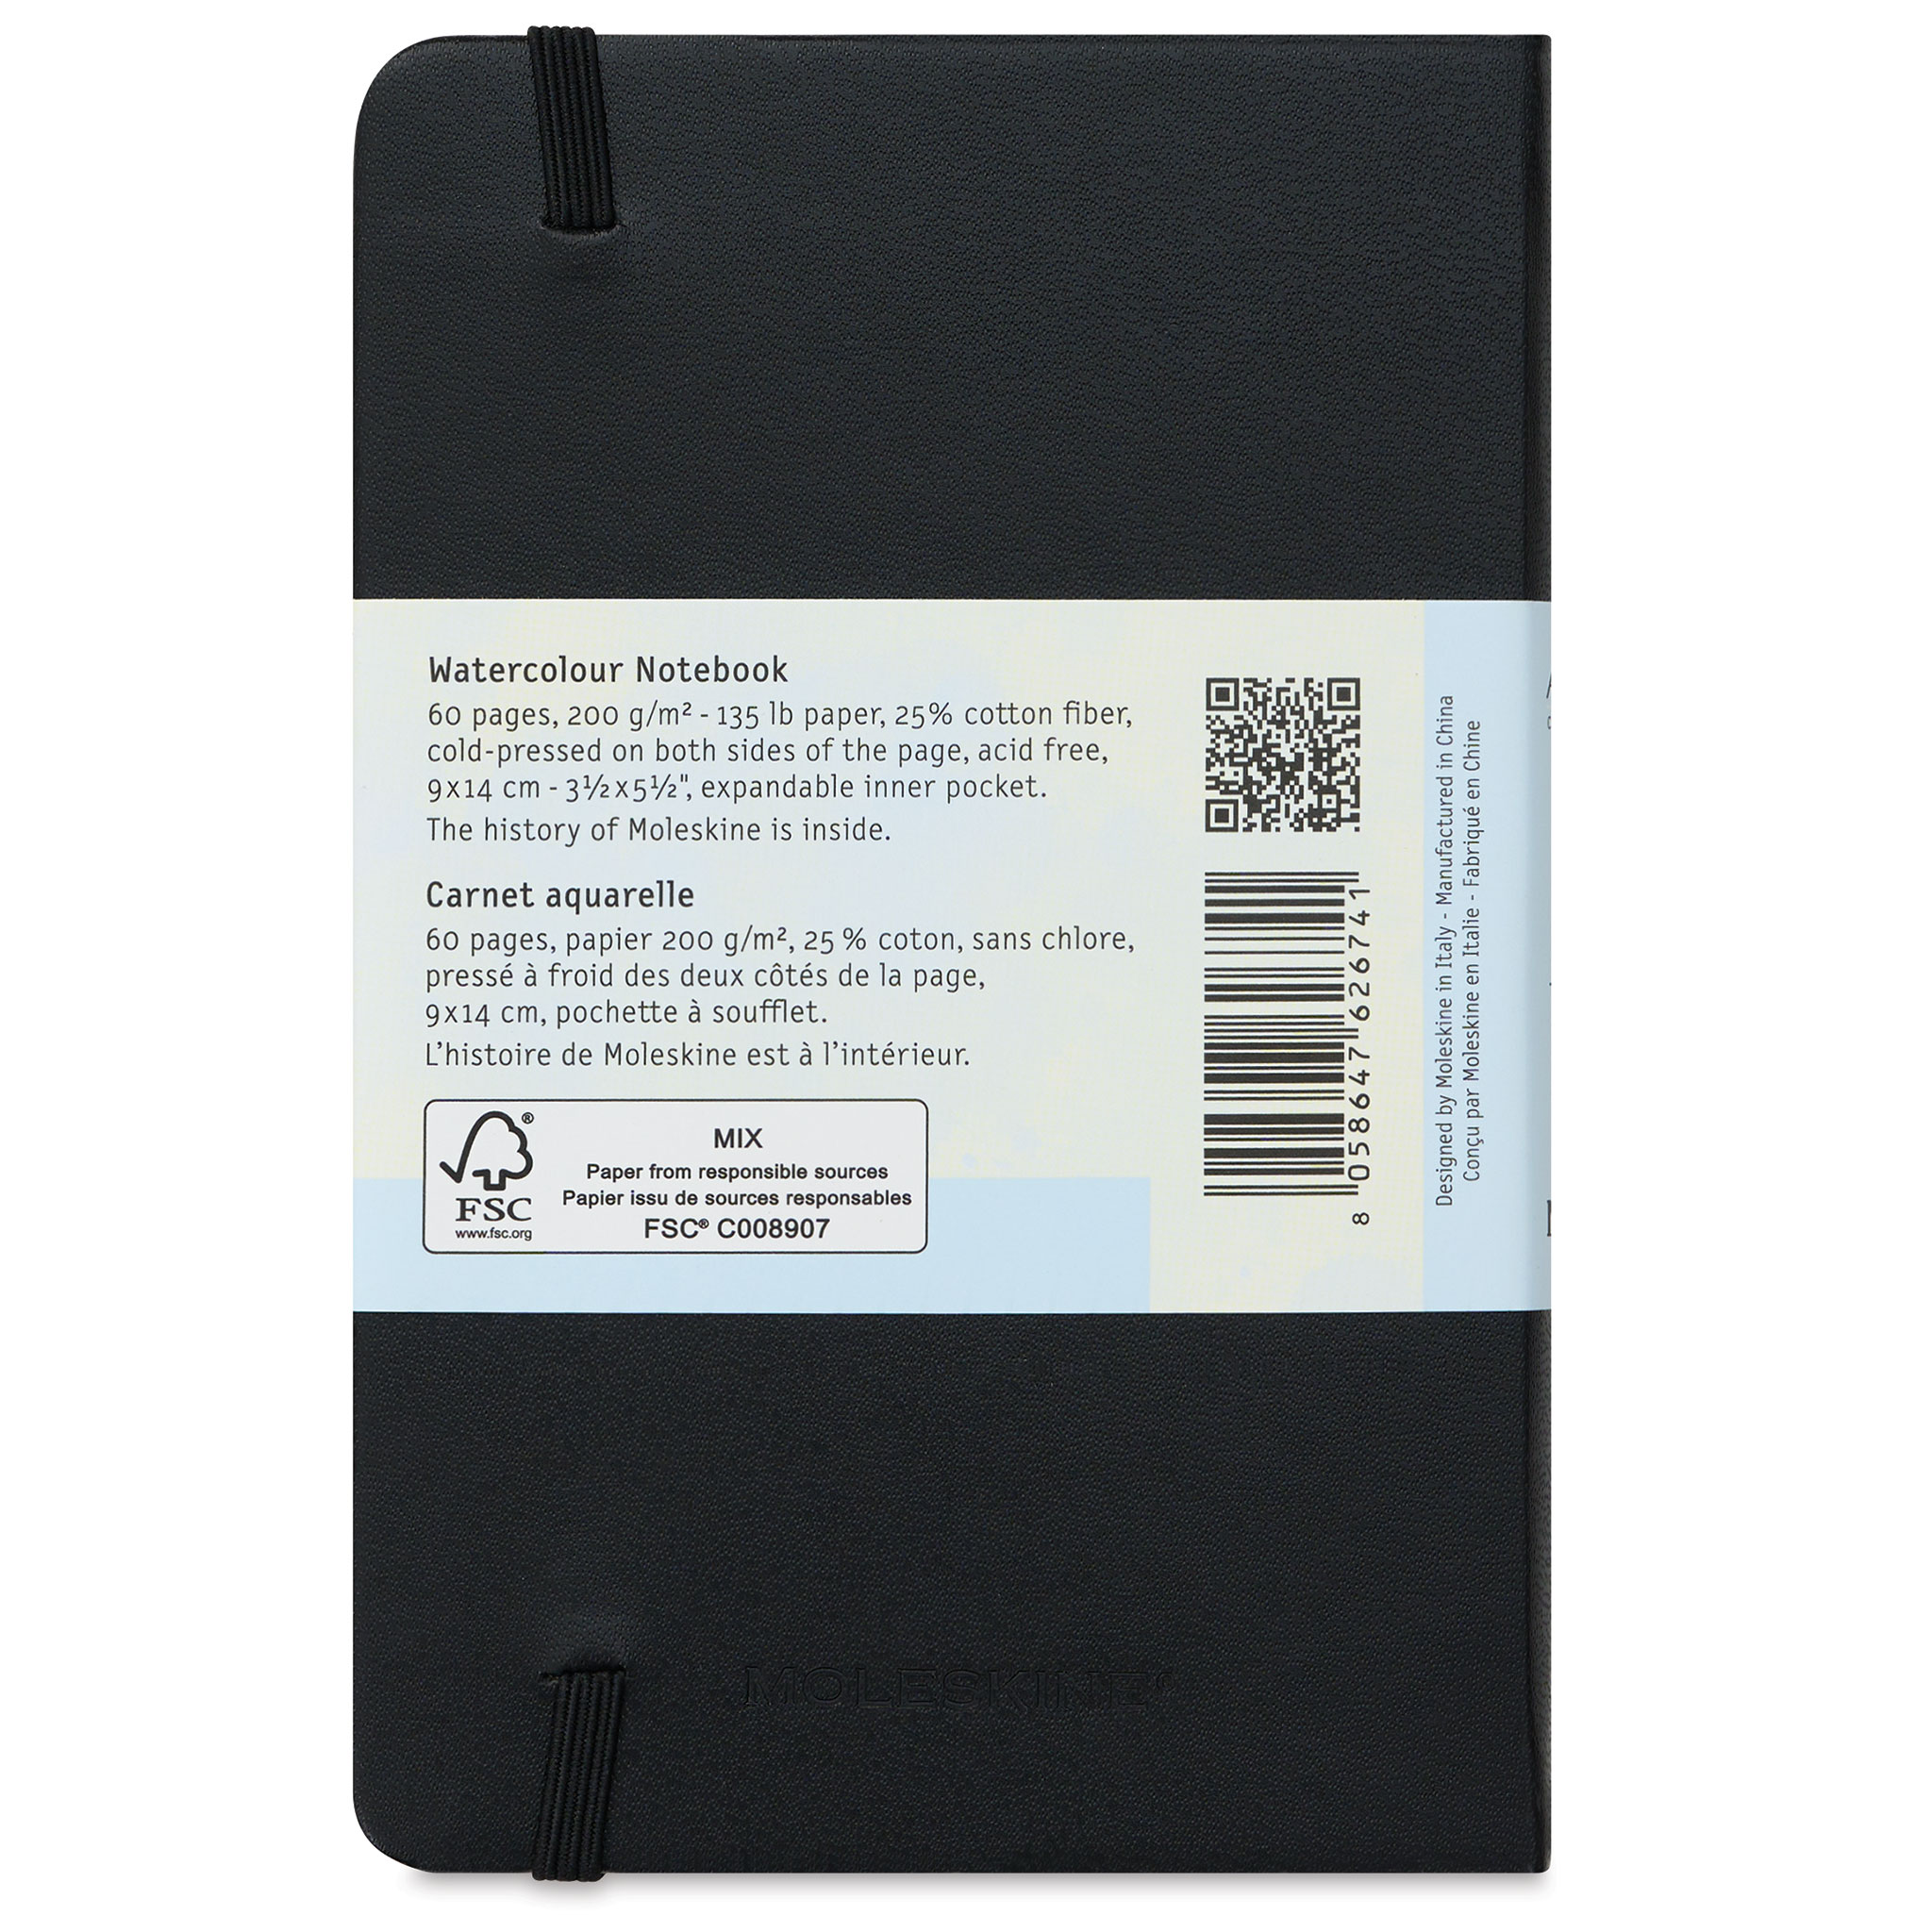 Moleskine Art Collection Watercolor Notebook- 8-1/4 x 5, 200 gsm